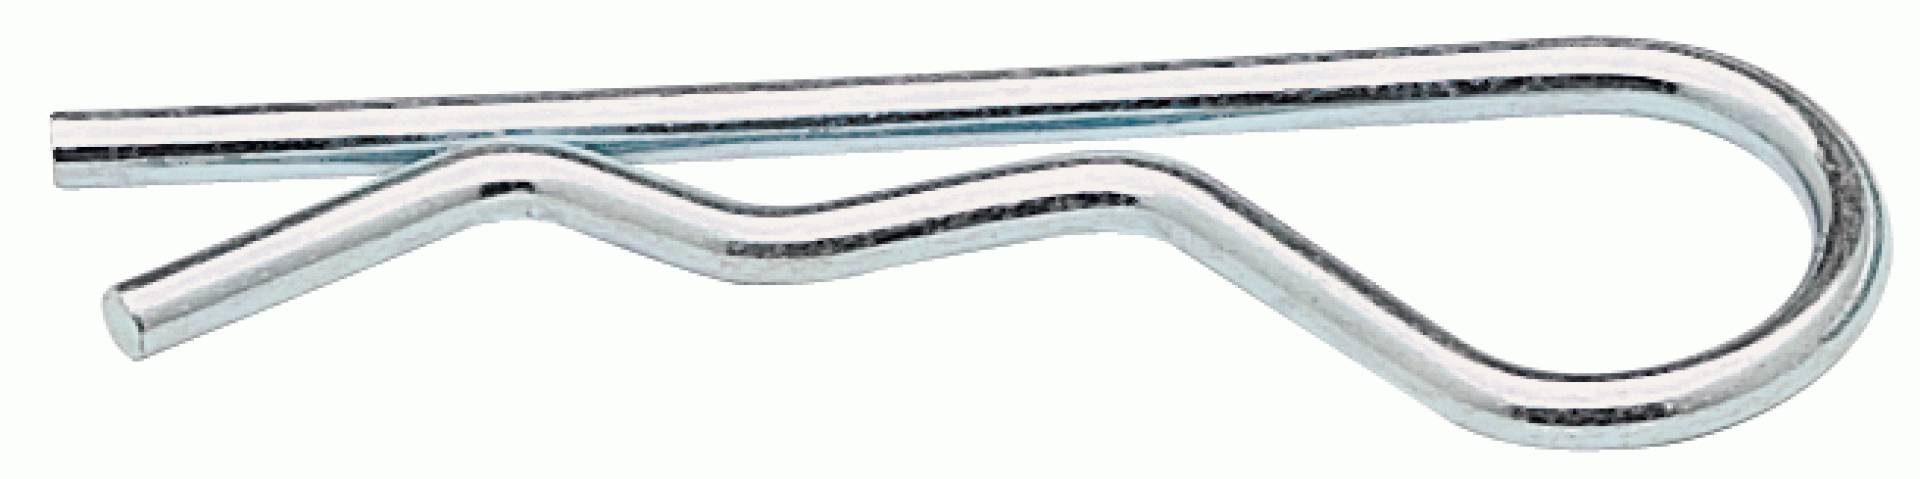 REESE | 55515-050 | SPRING COTTER PIN FOR 5/8" PULL PIN